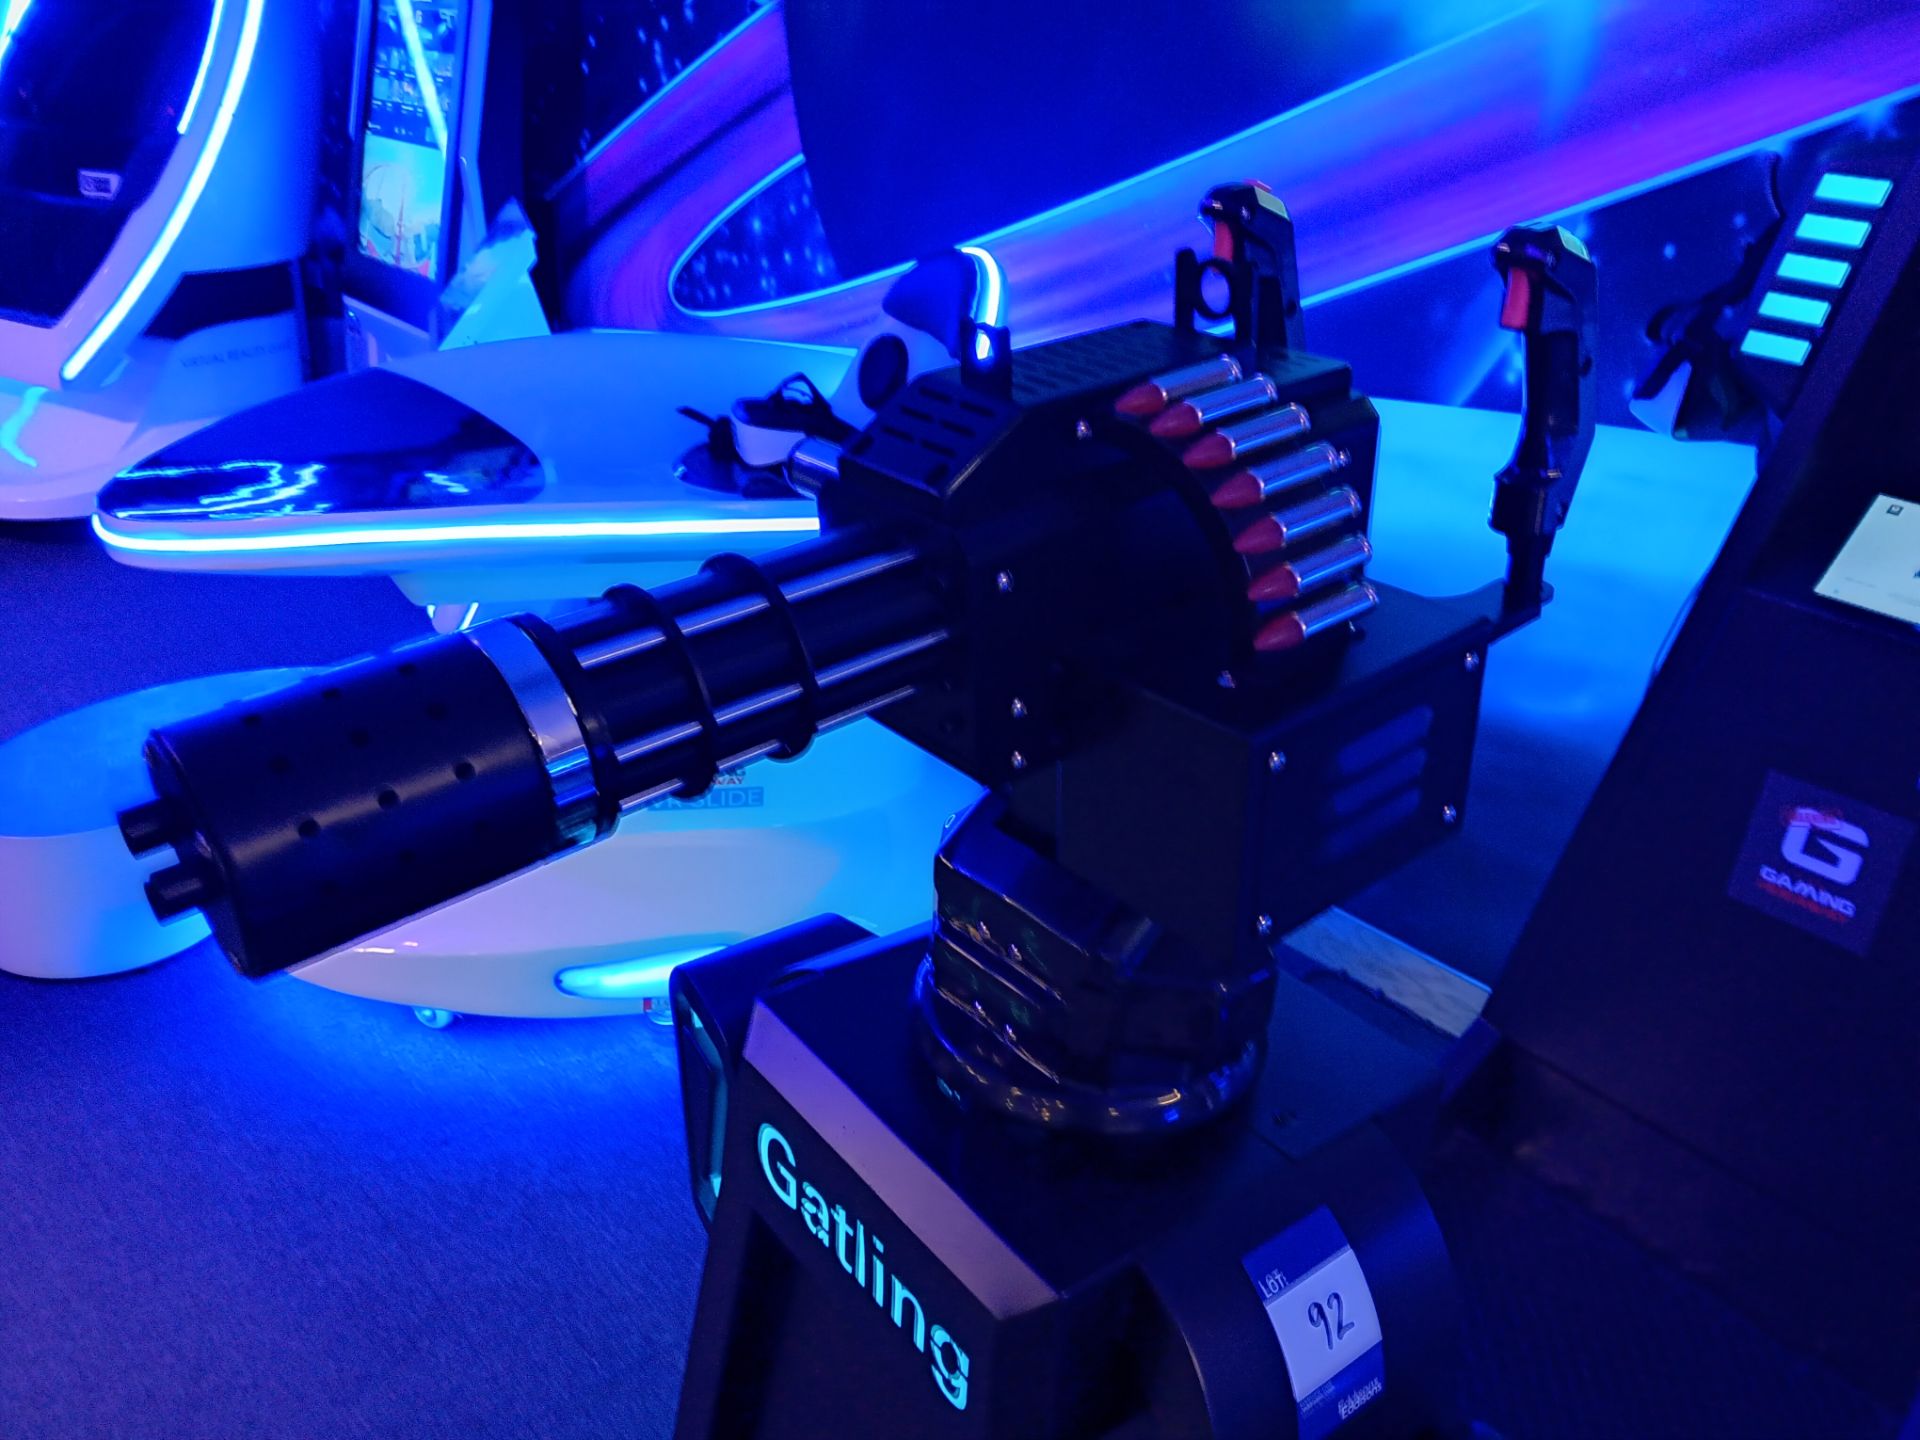 Movie Power VR Gatling Gun Shooting Simulator – Cost New £9,000 - Buyer to Disconnect & remove - Image 3 of 6